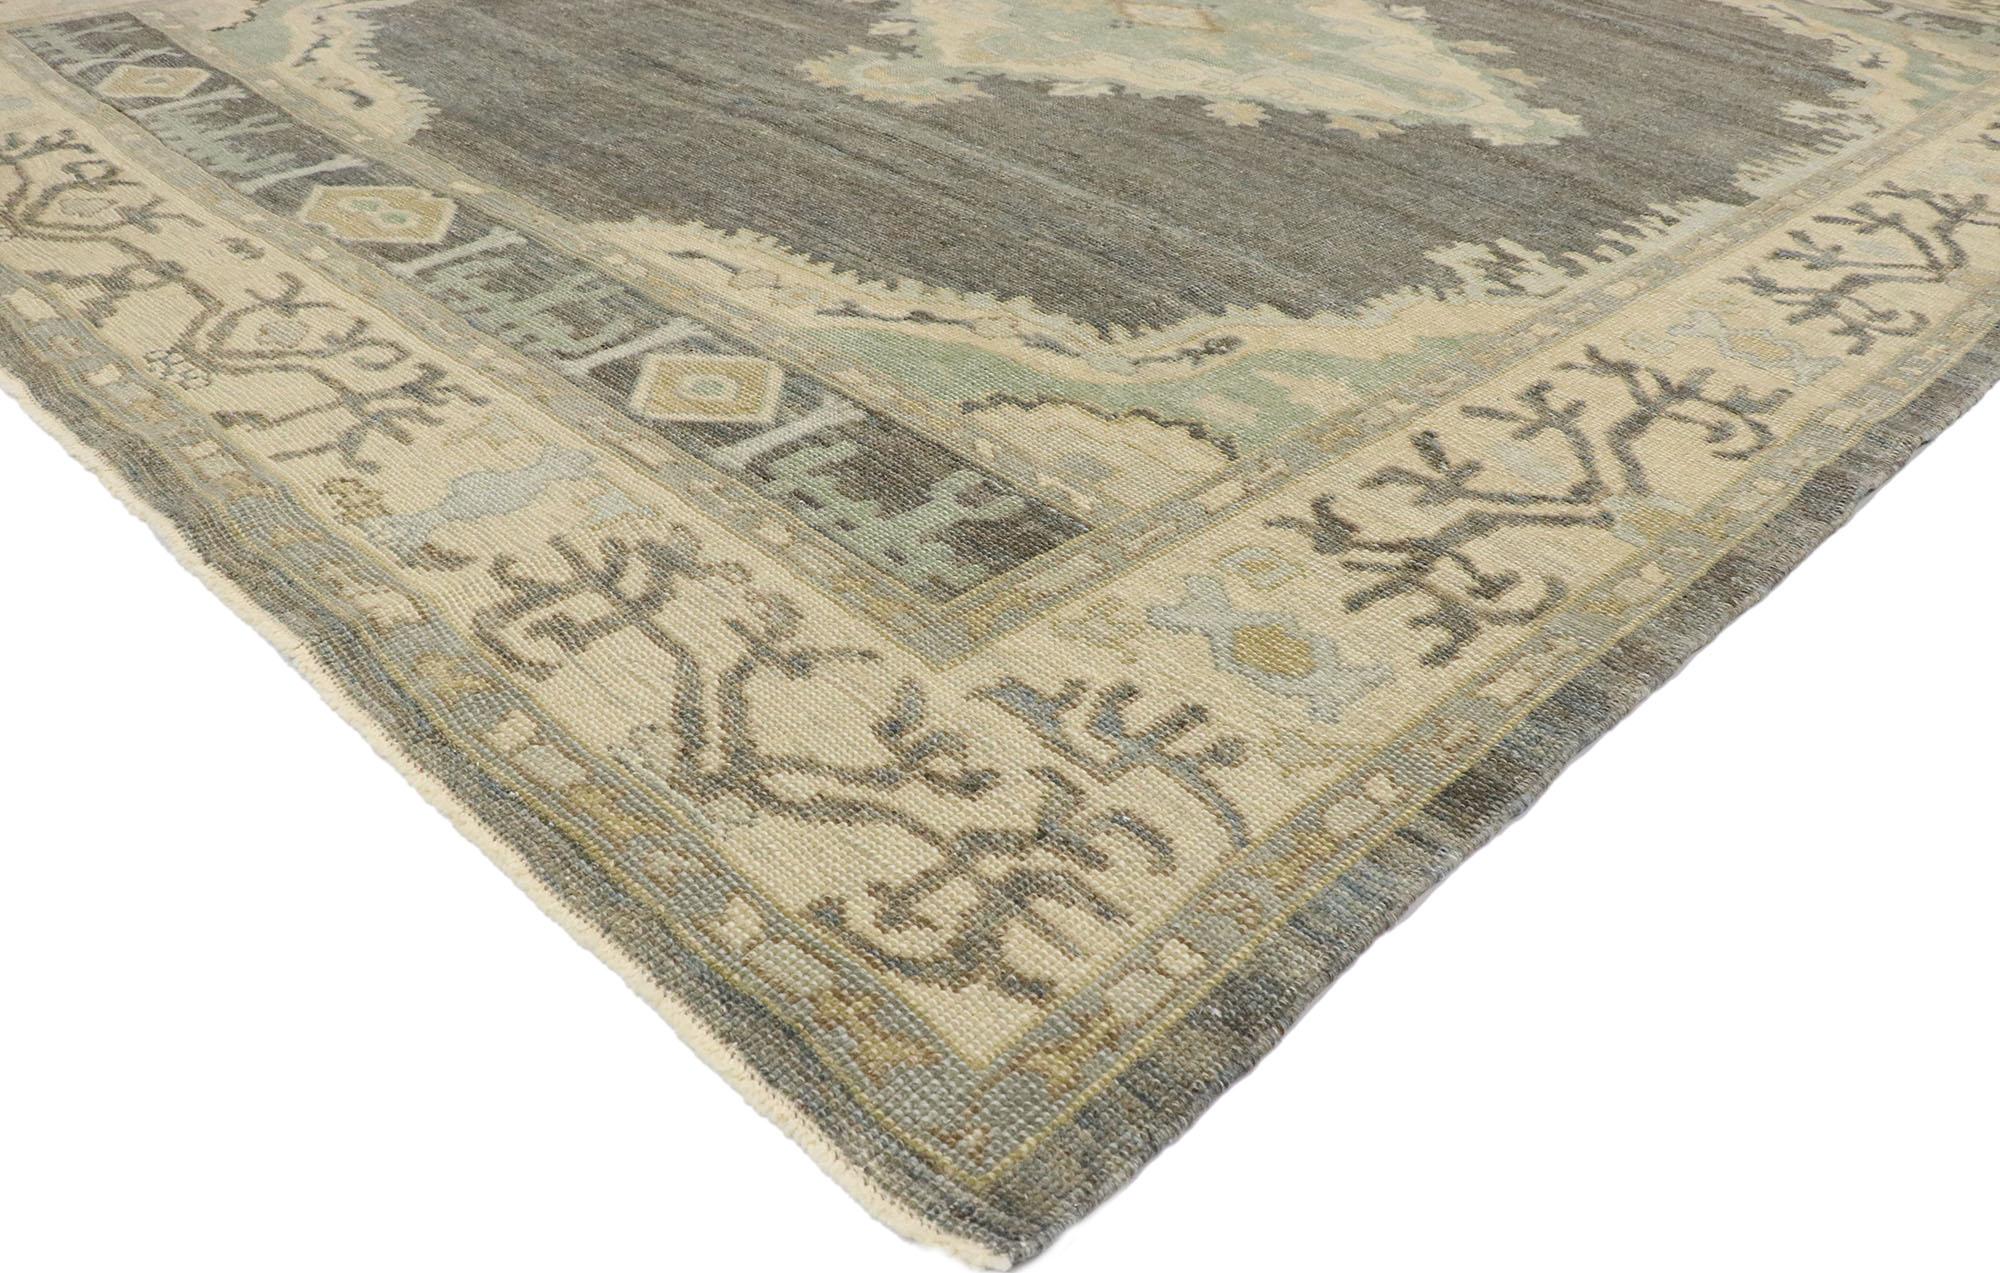 53437, new contemporary Turkish Oushak rug with Modern Transitional Bungalow style. Warm and inviting with neutral hues, this hand knotted wool contemporary Turkish Oushak rug charms with ease and beautifully embodies the fine craftsmanship of